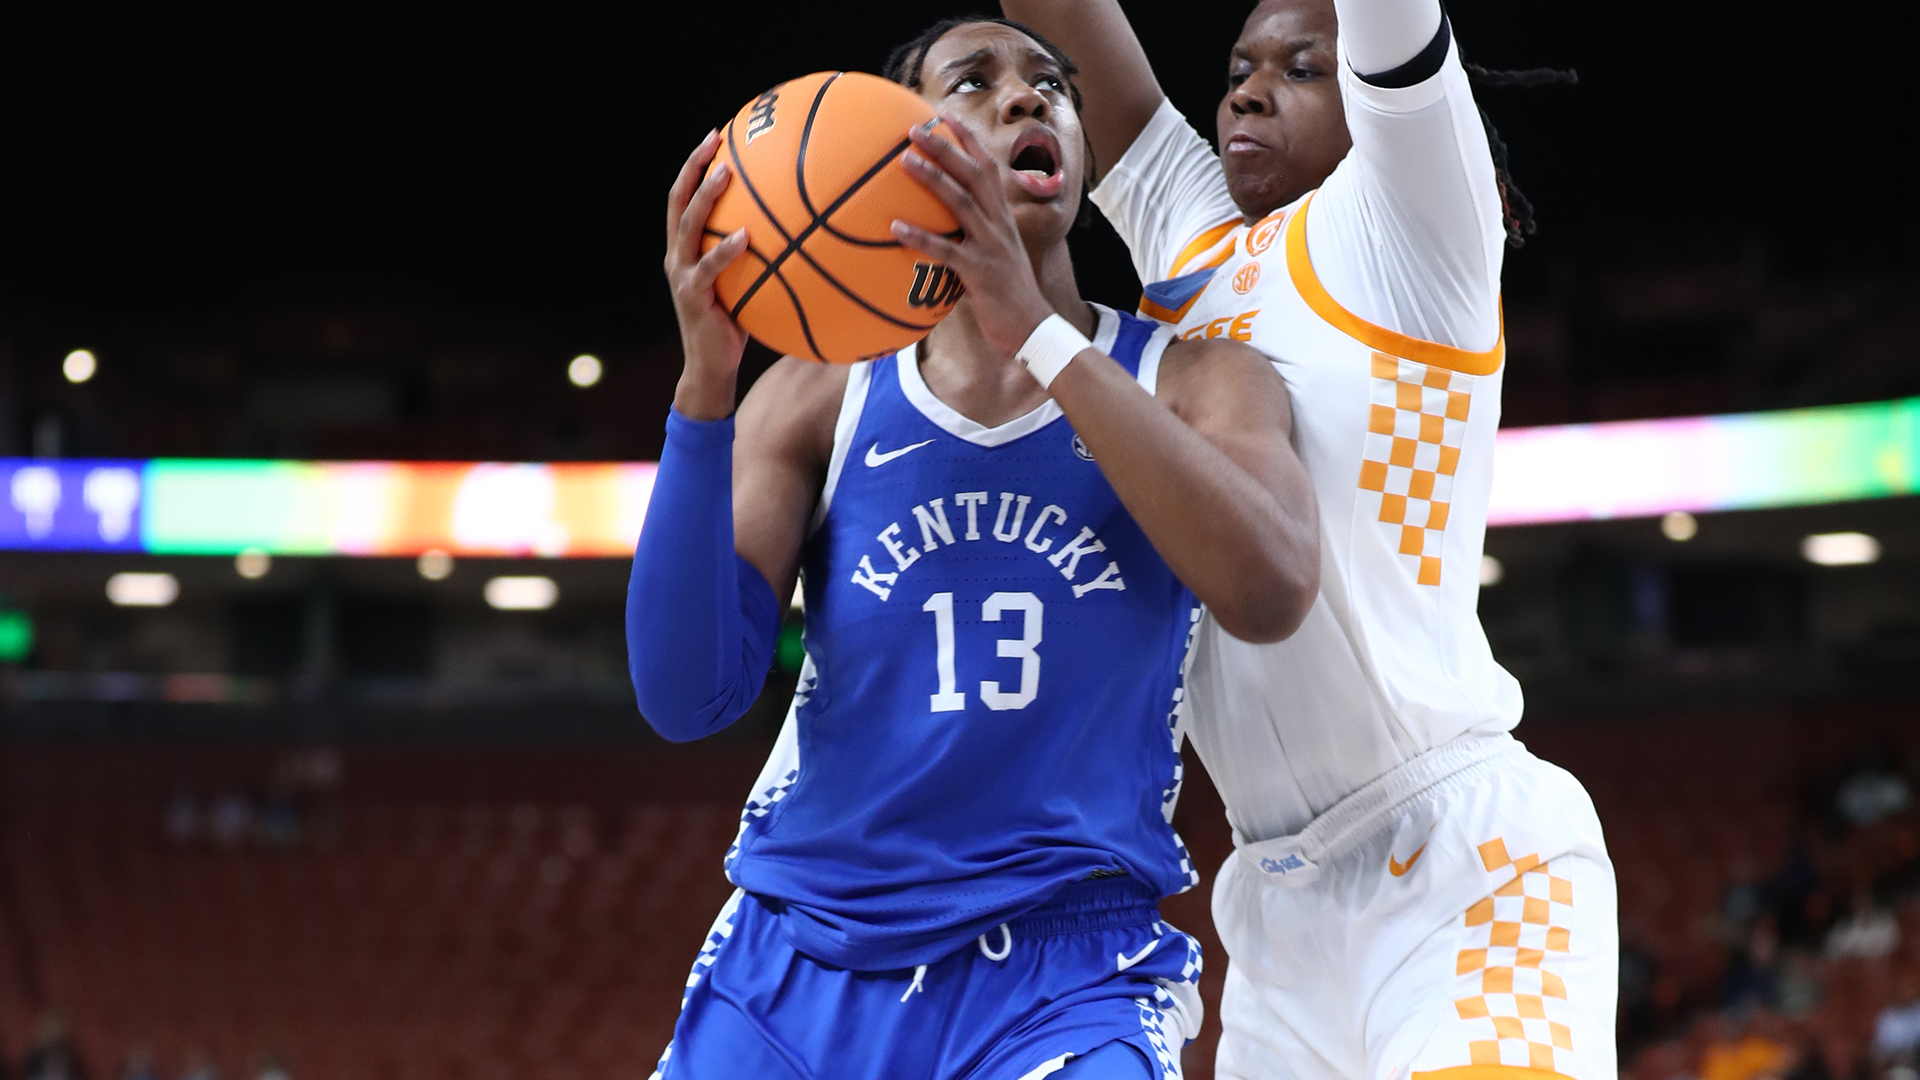 Kentucky Falls to Tennessee in SEC Tournament on Thursday